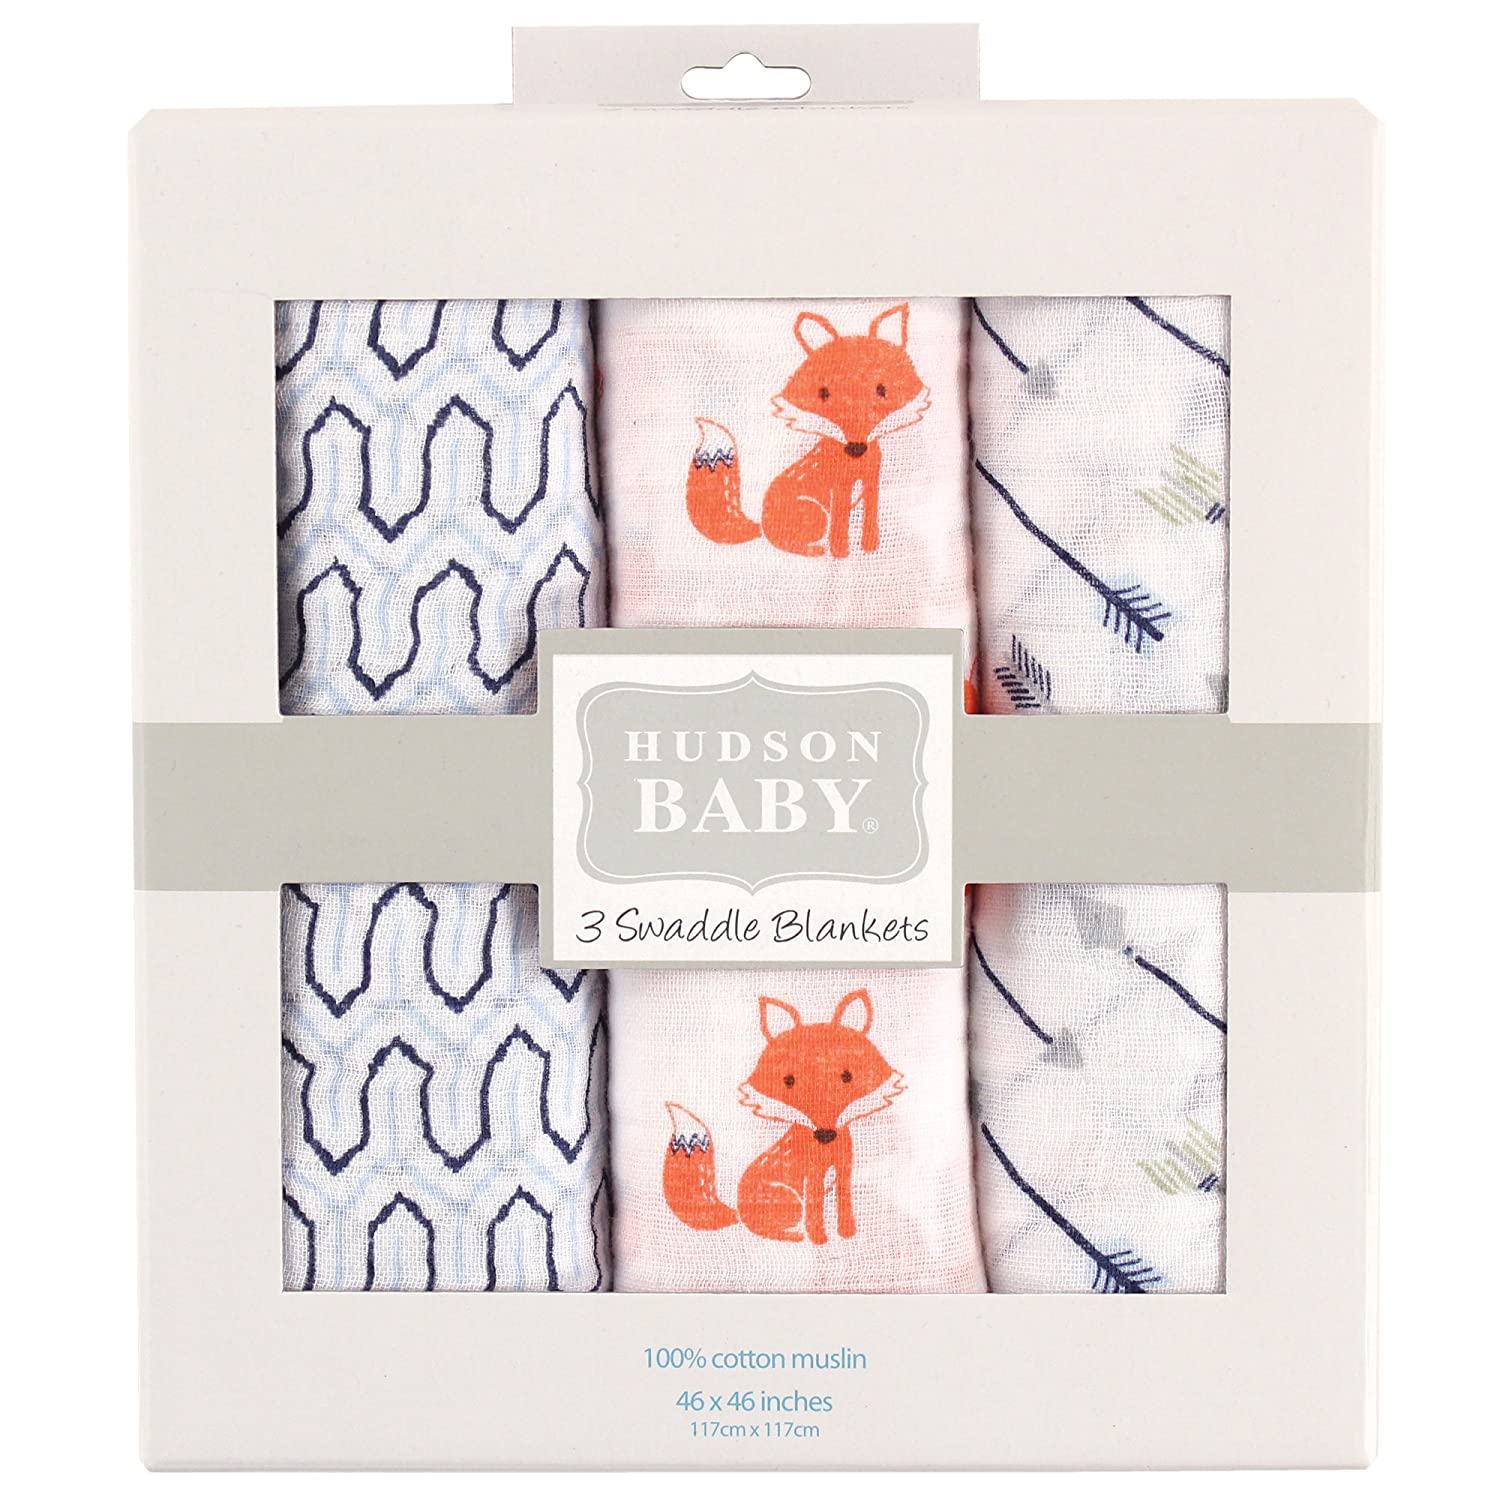 Hudson Baby Unisex Cotton Muslin Baby Swaddle Blanket, 3-Pack